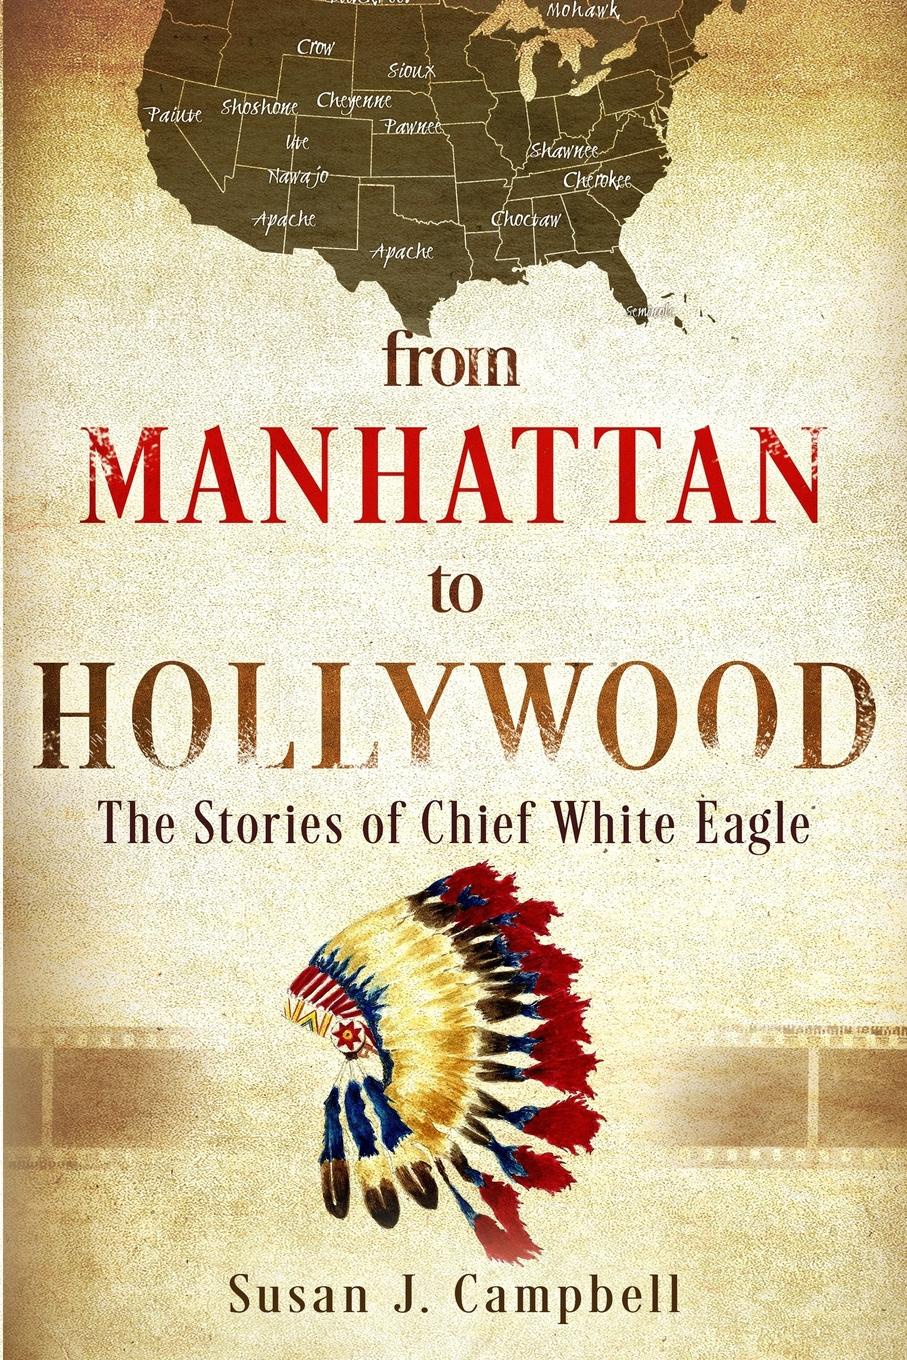 From Manhattan to Hollywood. The Stories of Chief White Eagle